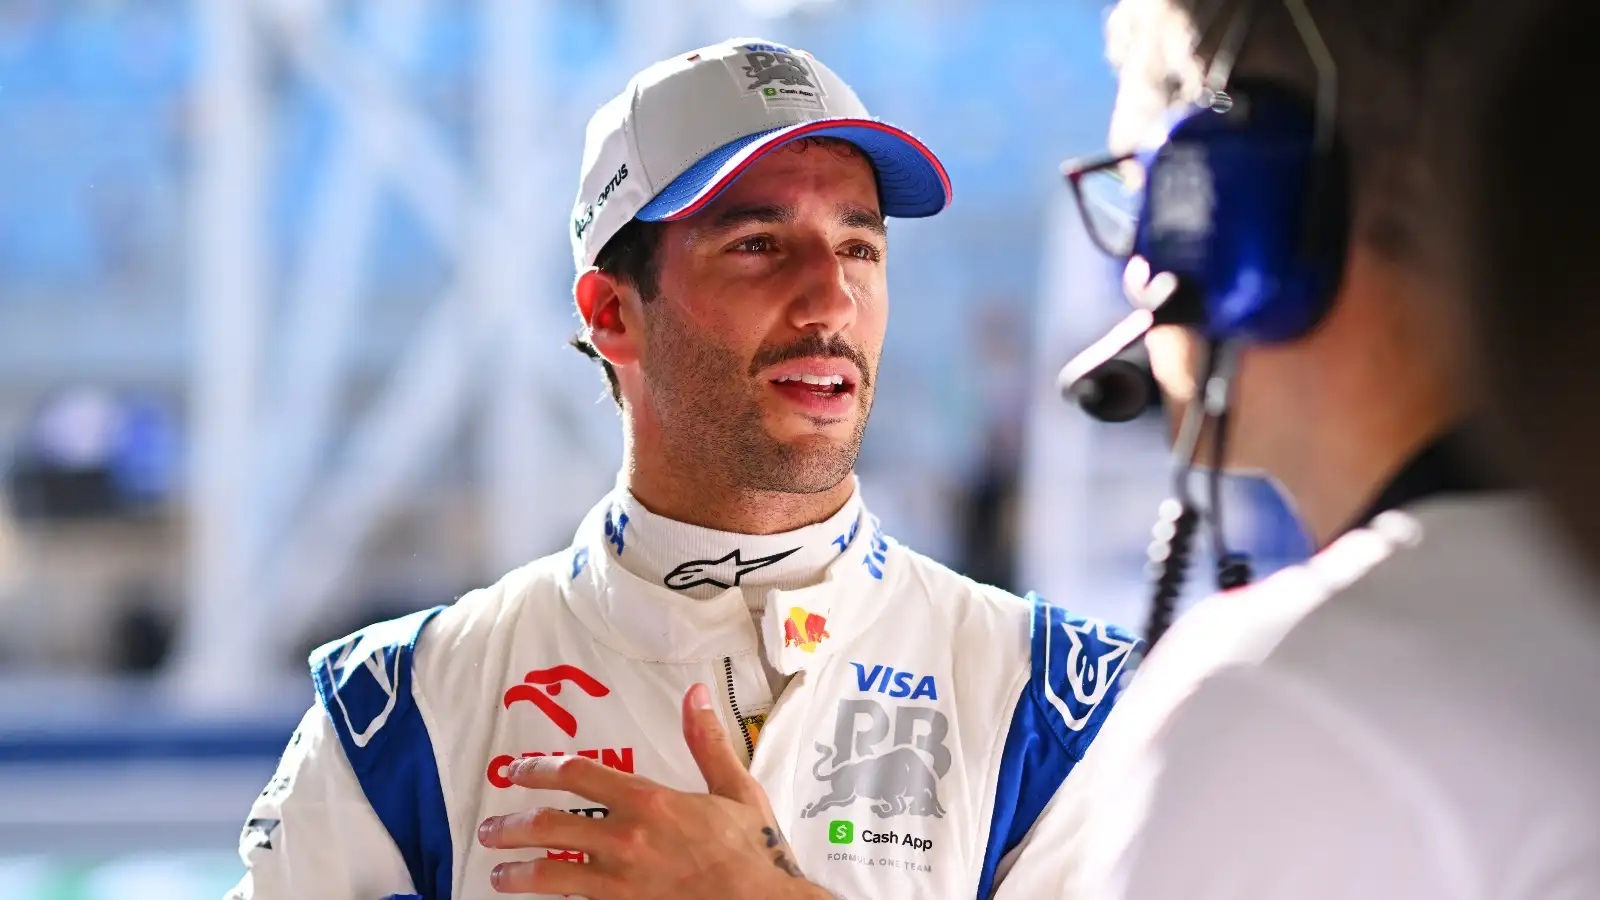 Daniel Ricciardo Delighted to Extend Stay with Visa Cash App RB for 2025